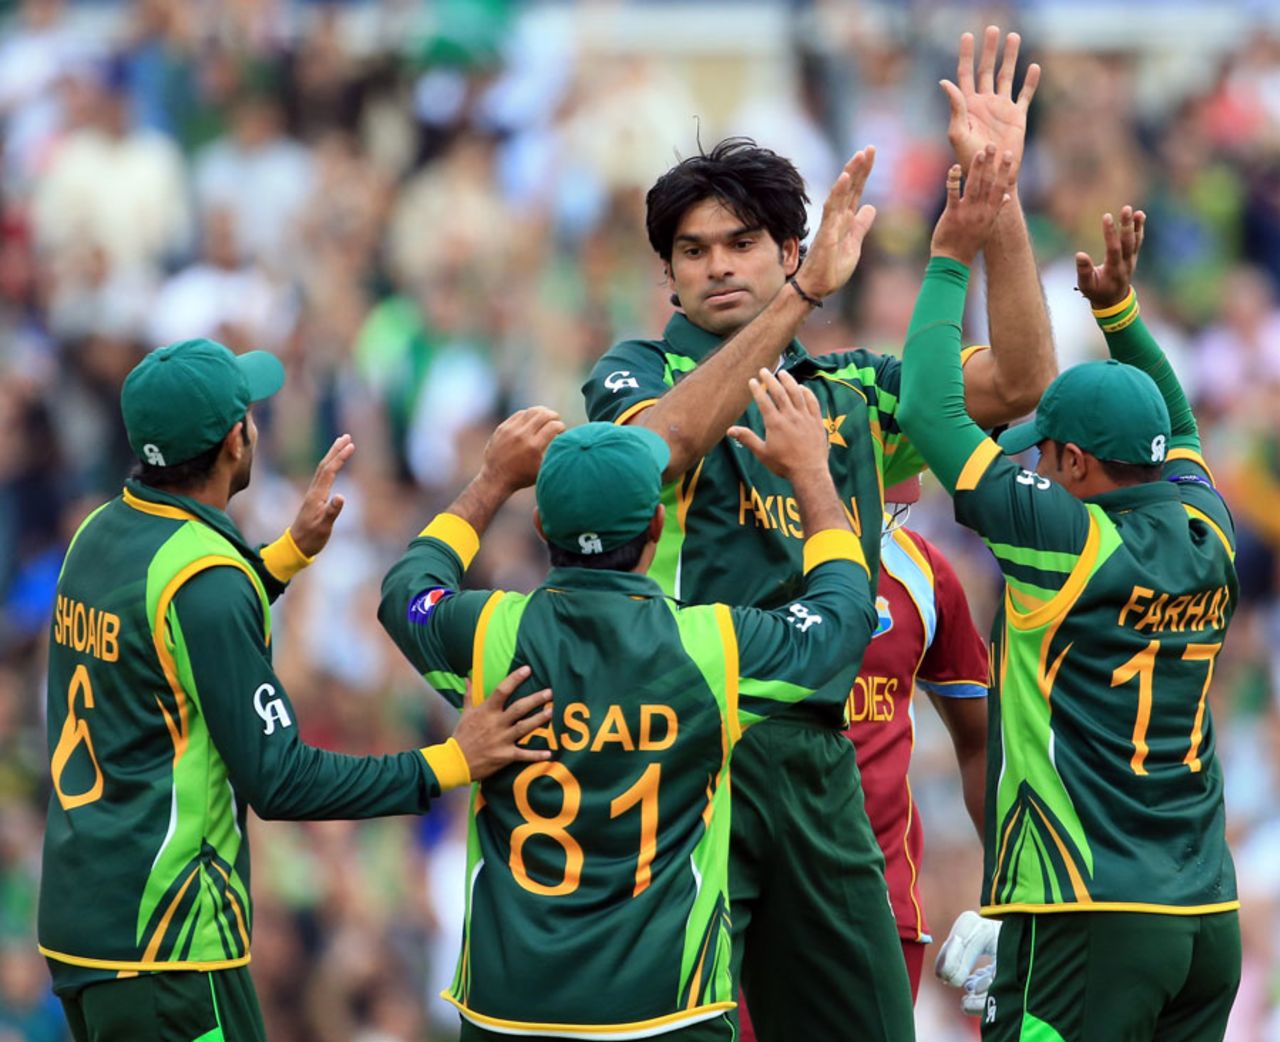 Mohammad Irfan celebrates a wicket with his team mates, West Indies v Pakistan, Champions Trophy, Group B, The Oval, June 7, 2013